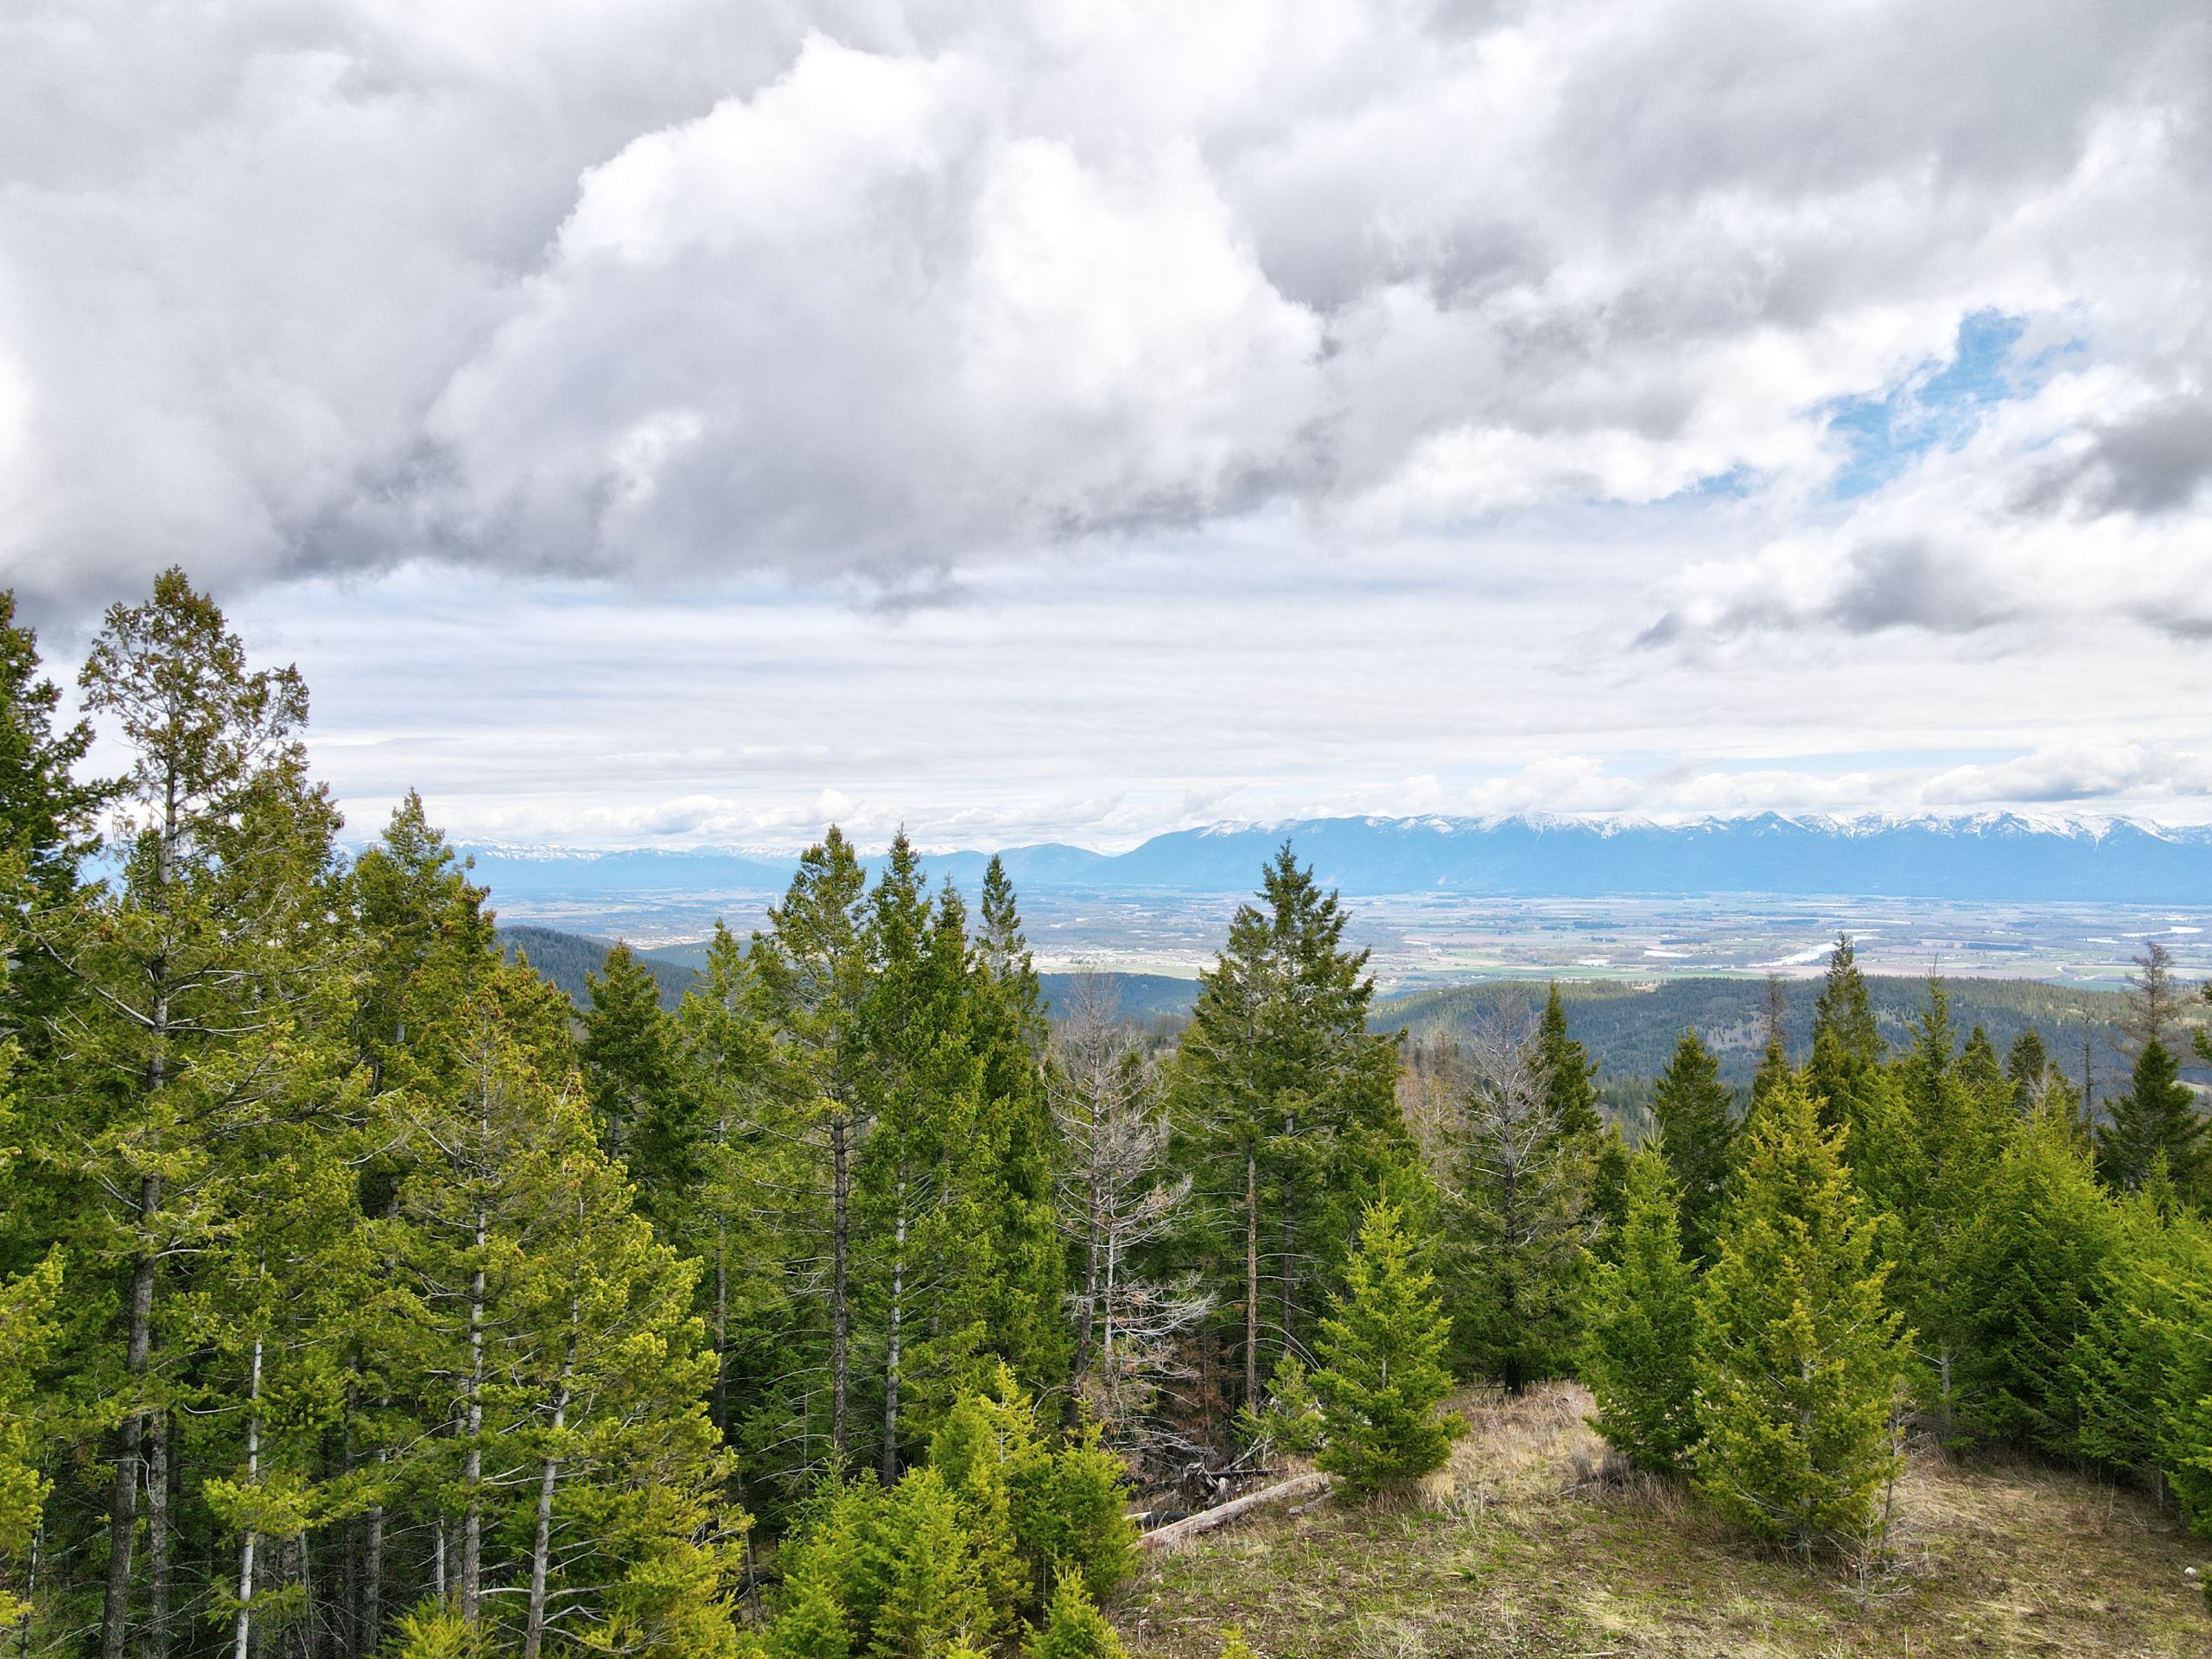 There's still time to buy: Nhn Emmons Canyon Road Kalispell